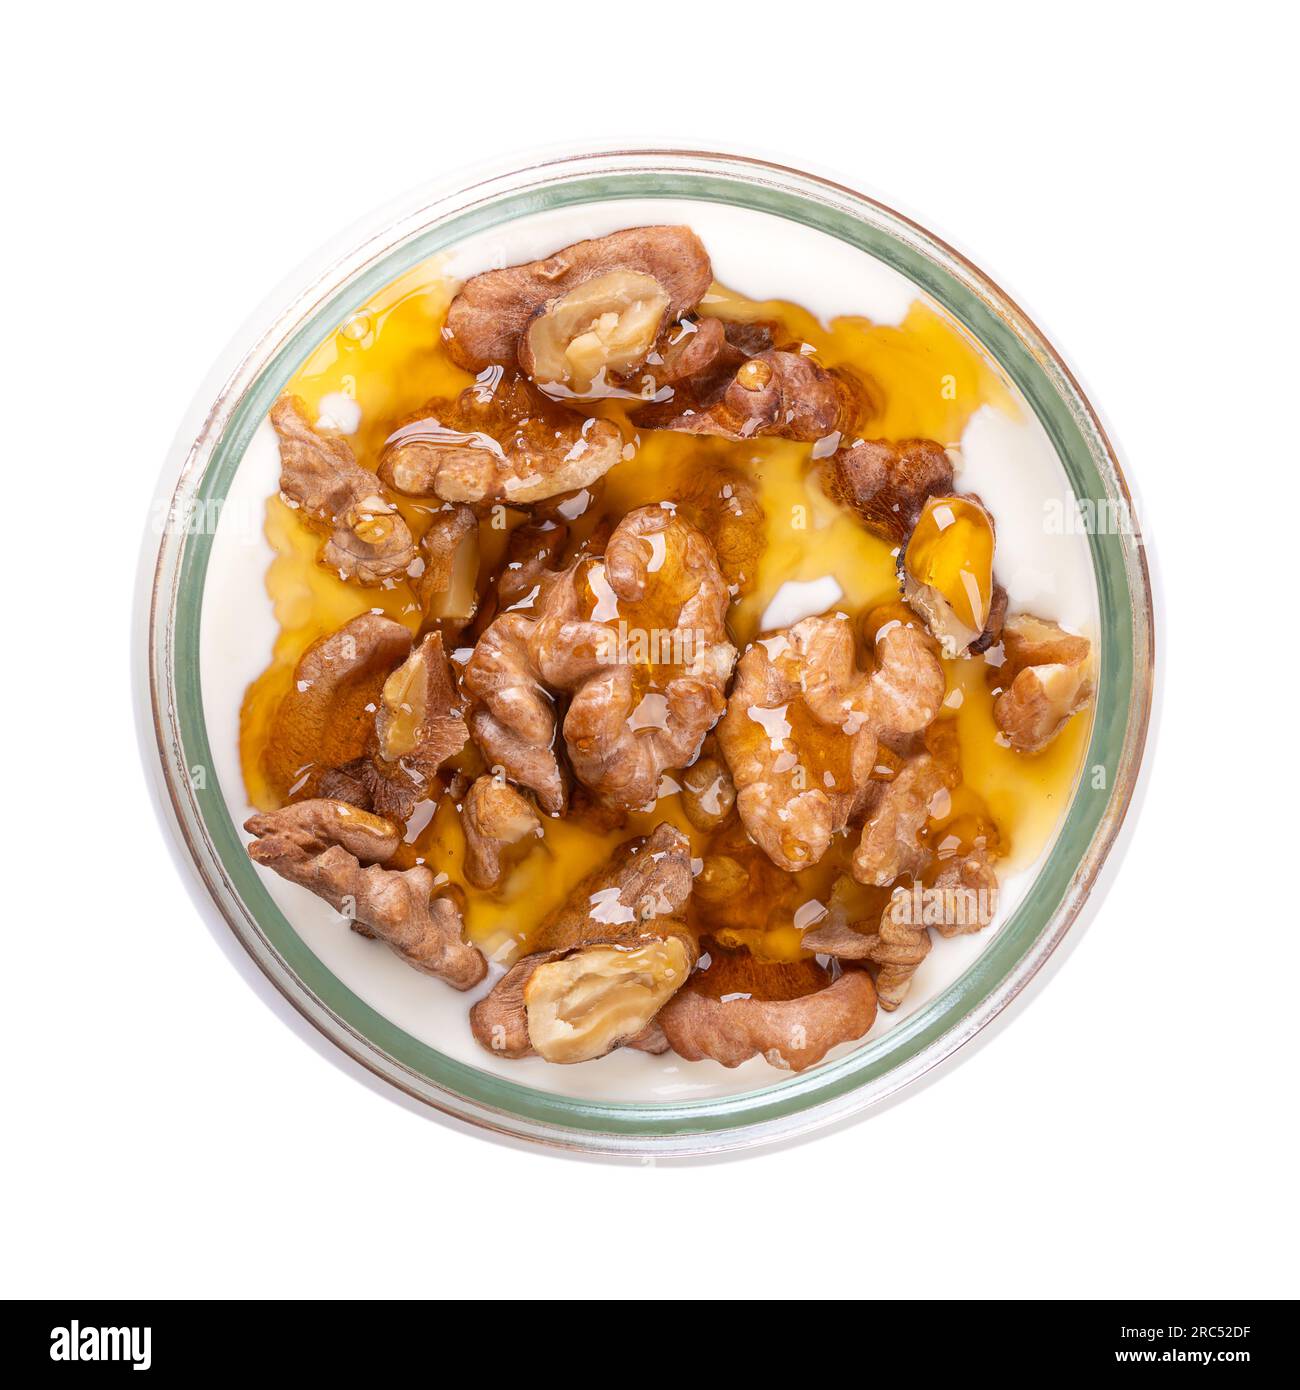 Greek yogurt with honey and roasted walnuts, in a glass jar. Yiaourti me meli, a traditional treat, dessert and snack, made of stirred, creamy yogurt. Stock Photo